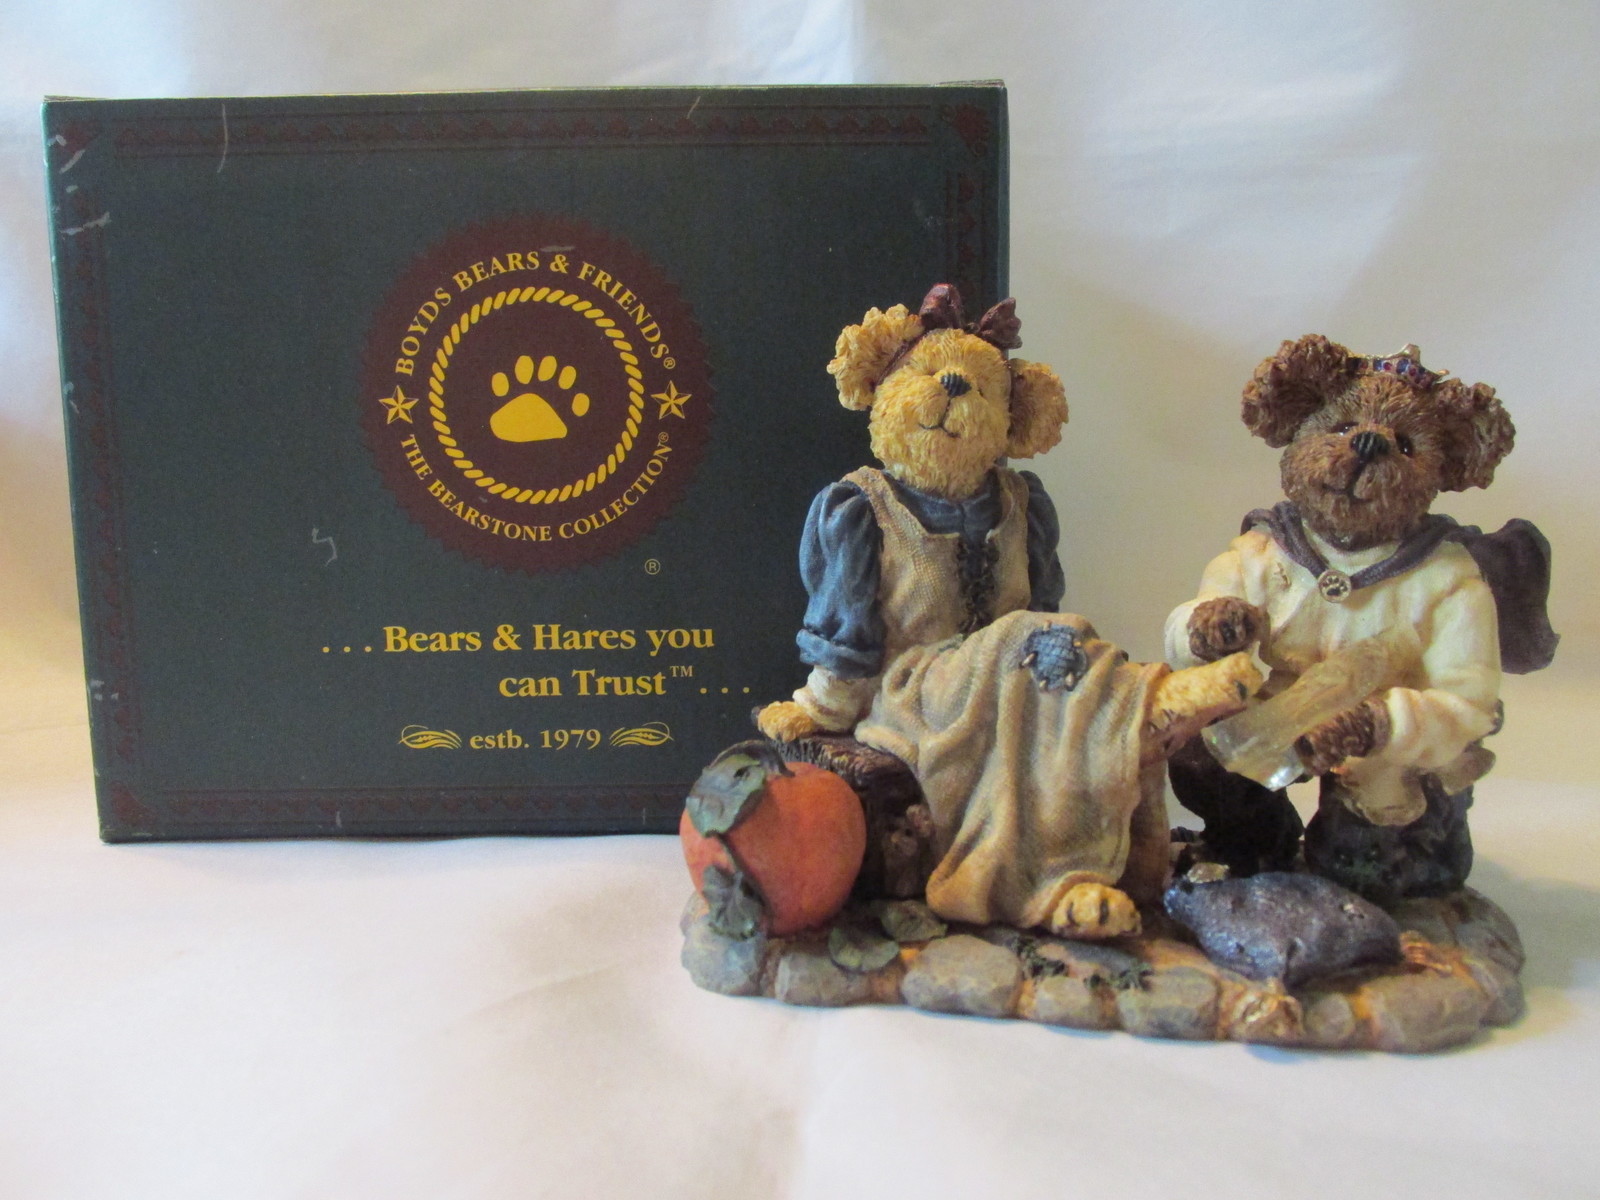 Boyds Bears & Friends "Cindyrella & Prince Charming...If the Shoe Fits", 2001 - $21.99